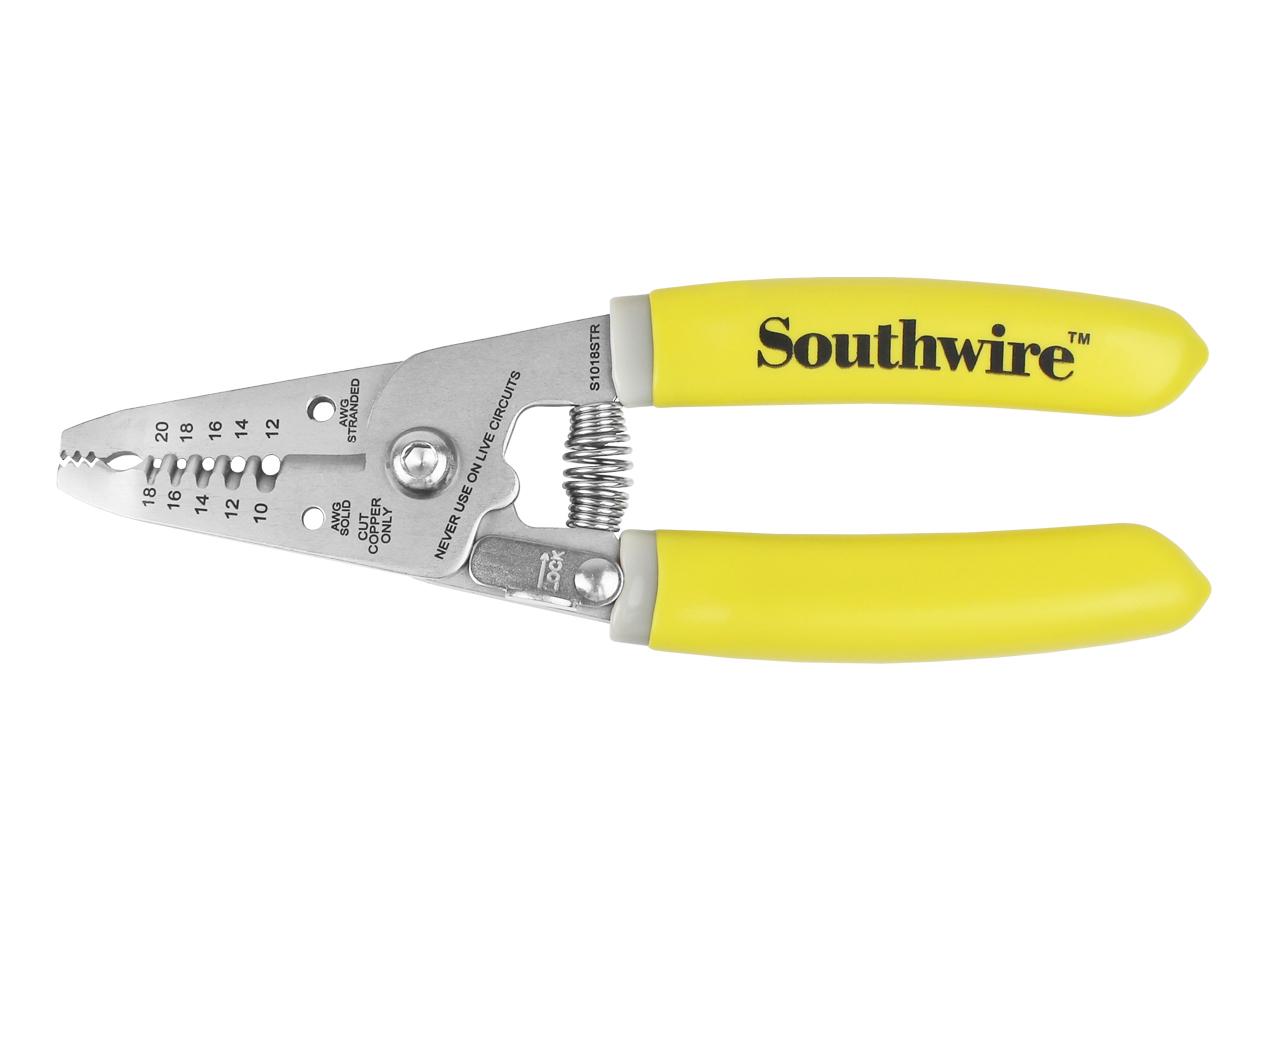 Southwire 6in Compact Wire Stripper for $4.99